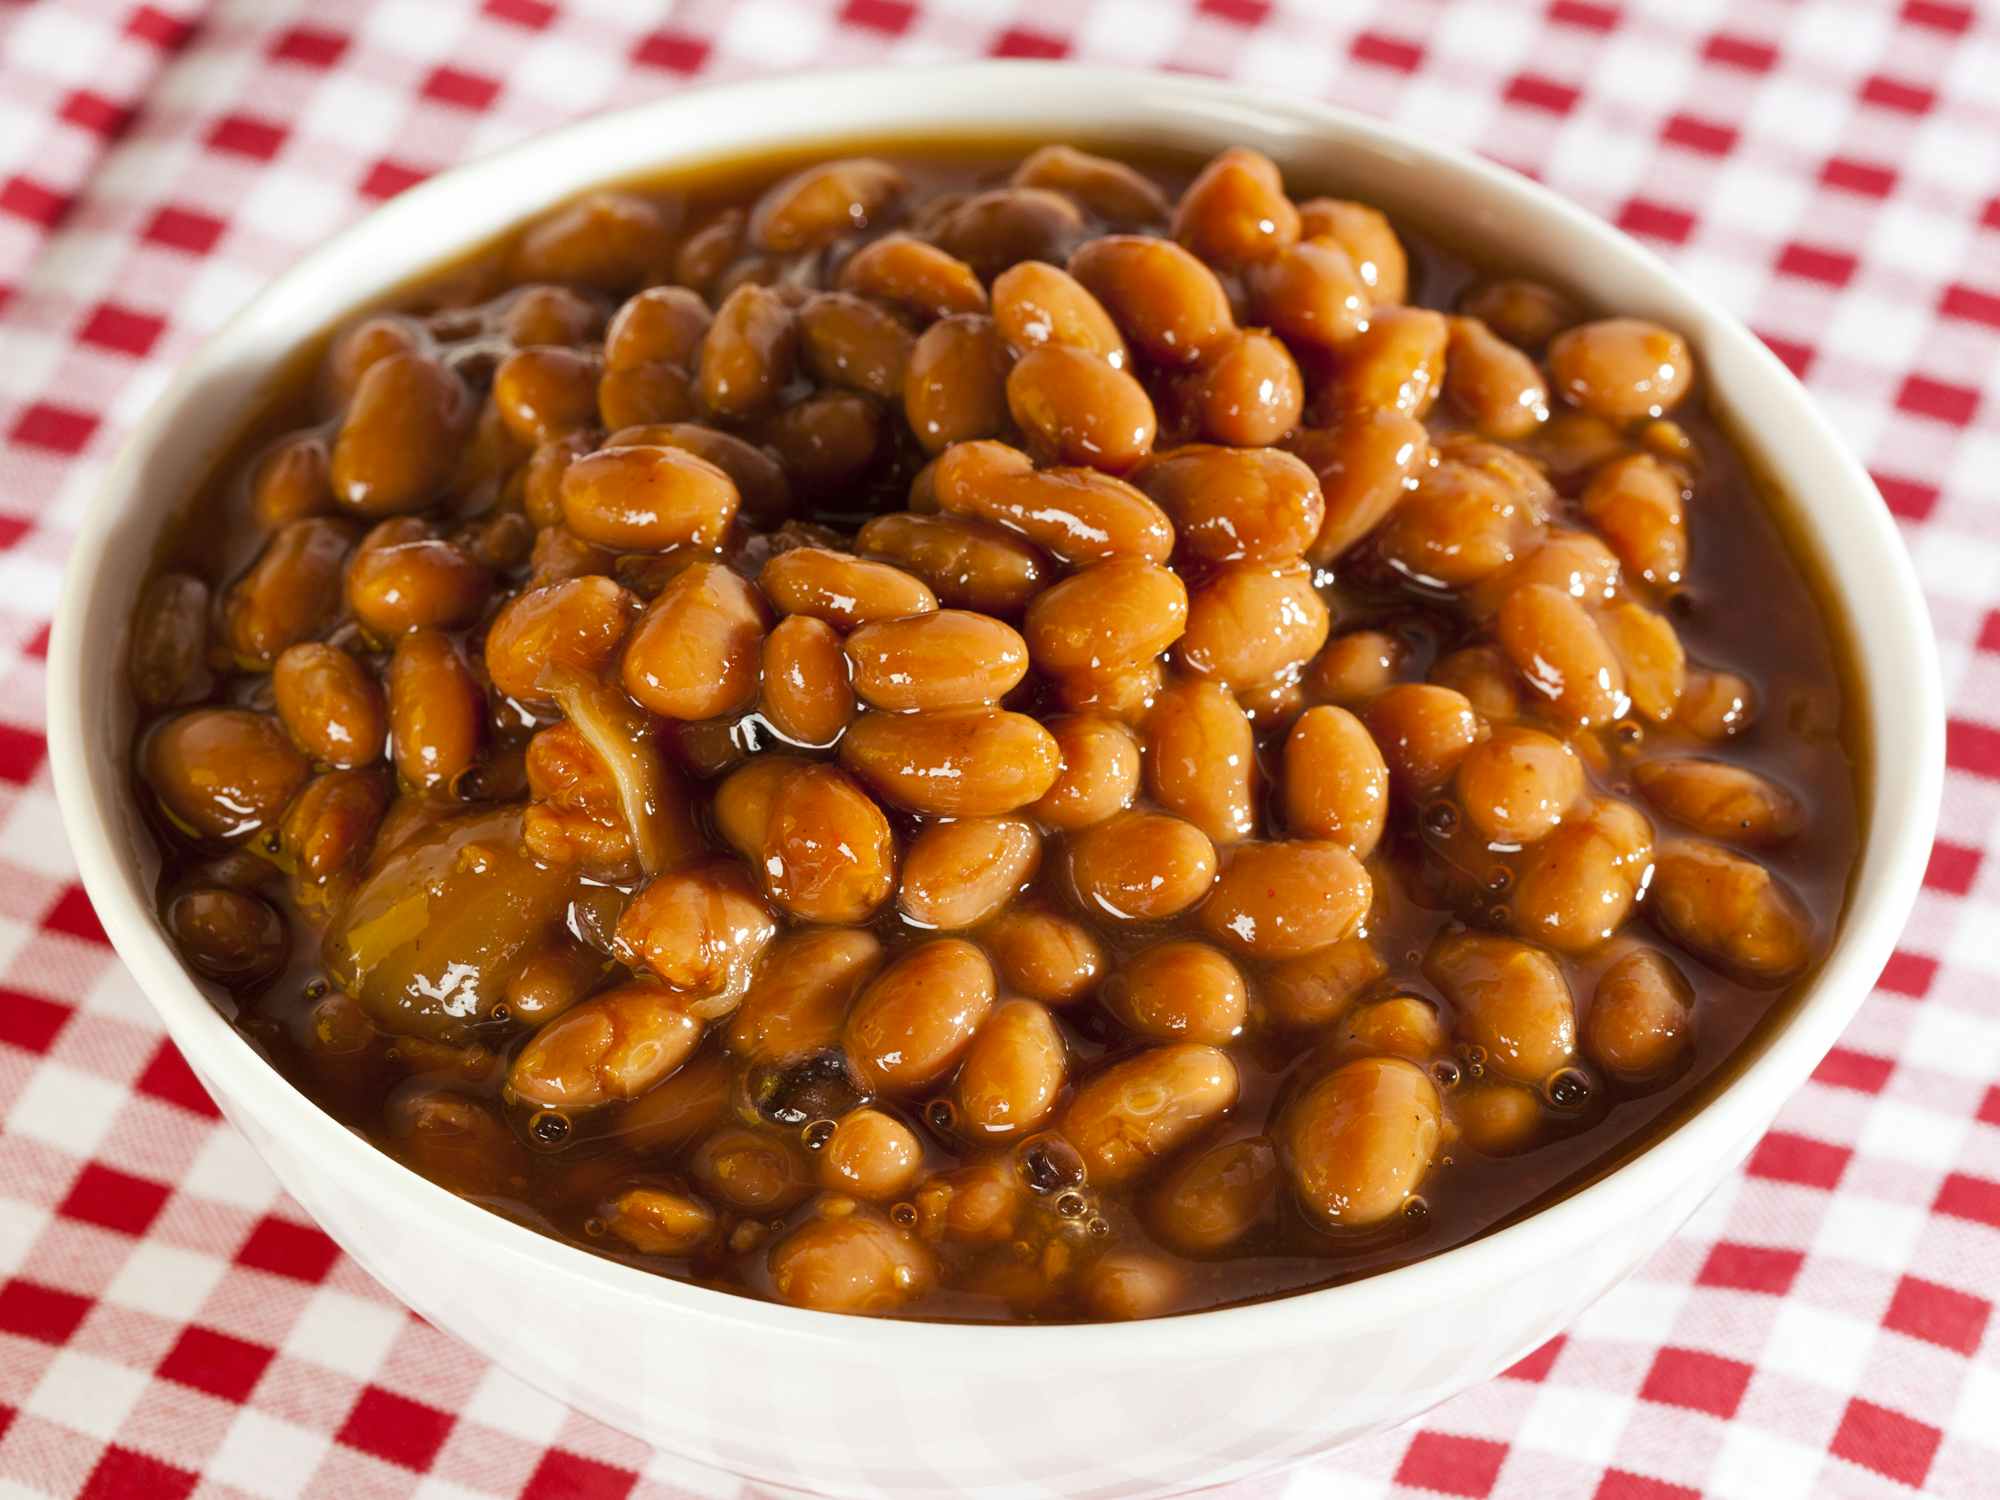 Baked beans in a bowl